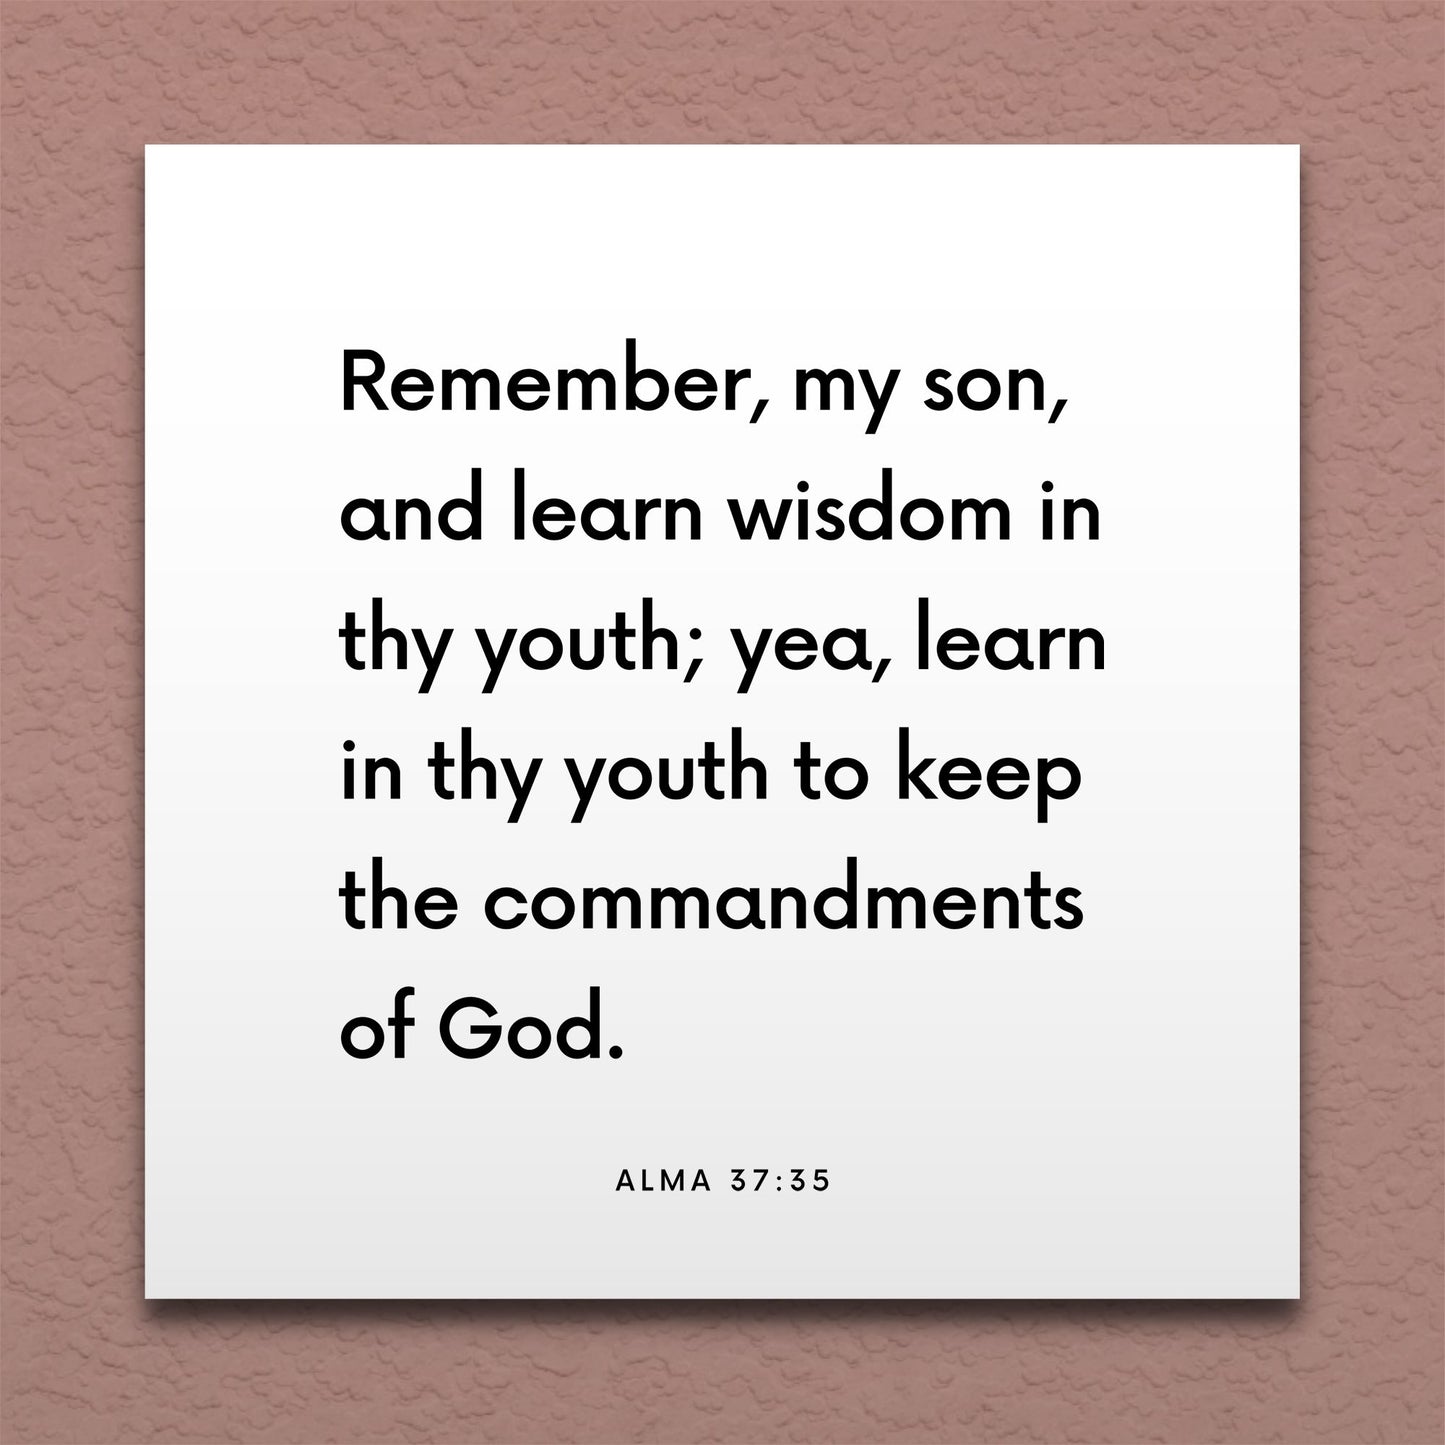 Wall-mounted scripture tile for Alma 37:35 - "Remember, my son, and learn wisdom in thy youth"